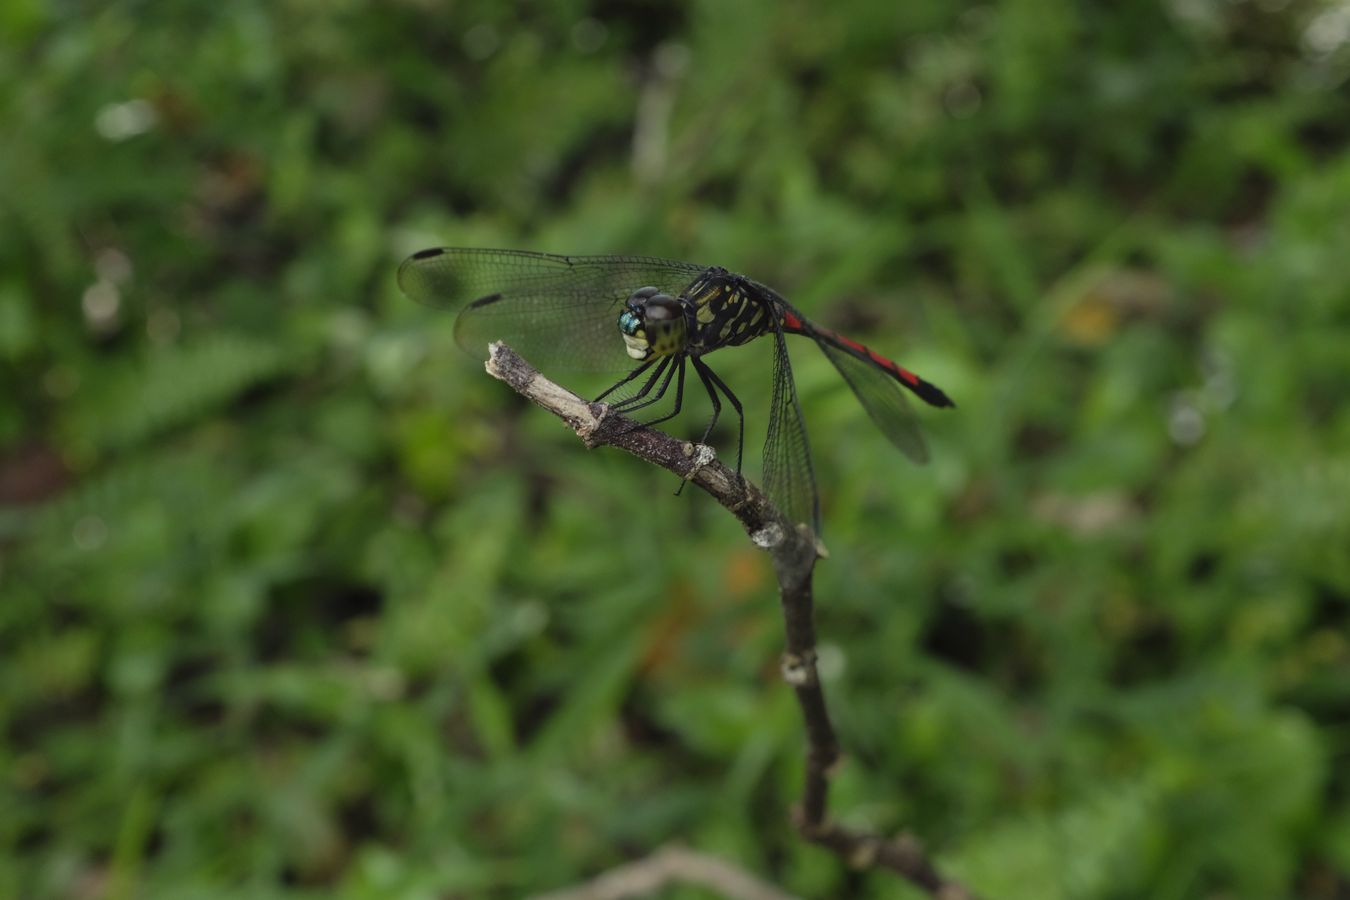 Male Asiatic Blood Tail Dragonfly { Lathrecista Asiatica ] o Grenadier { Agrionoptera Insignis }